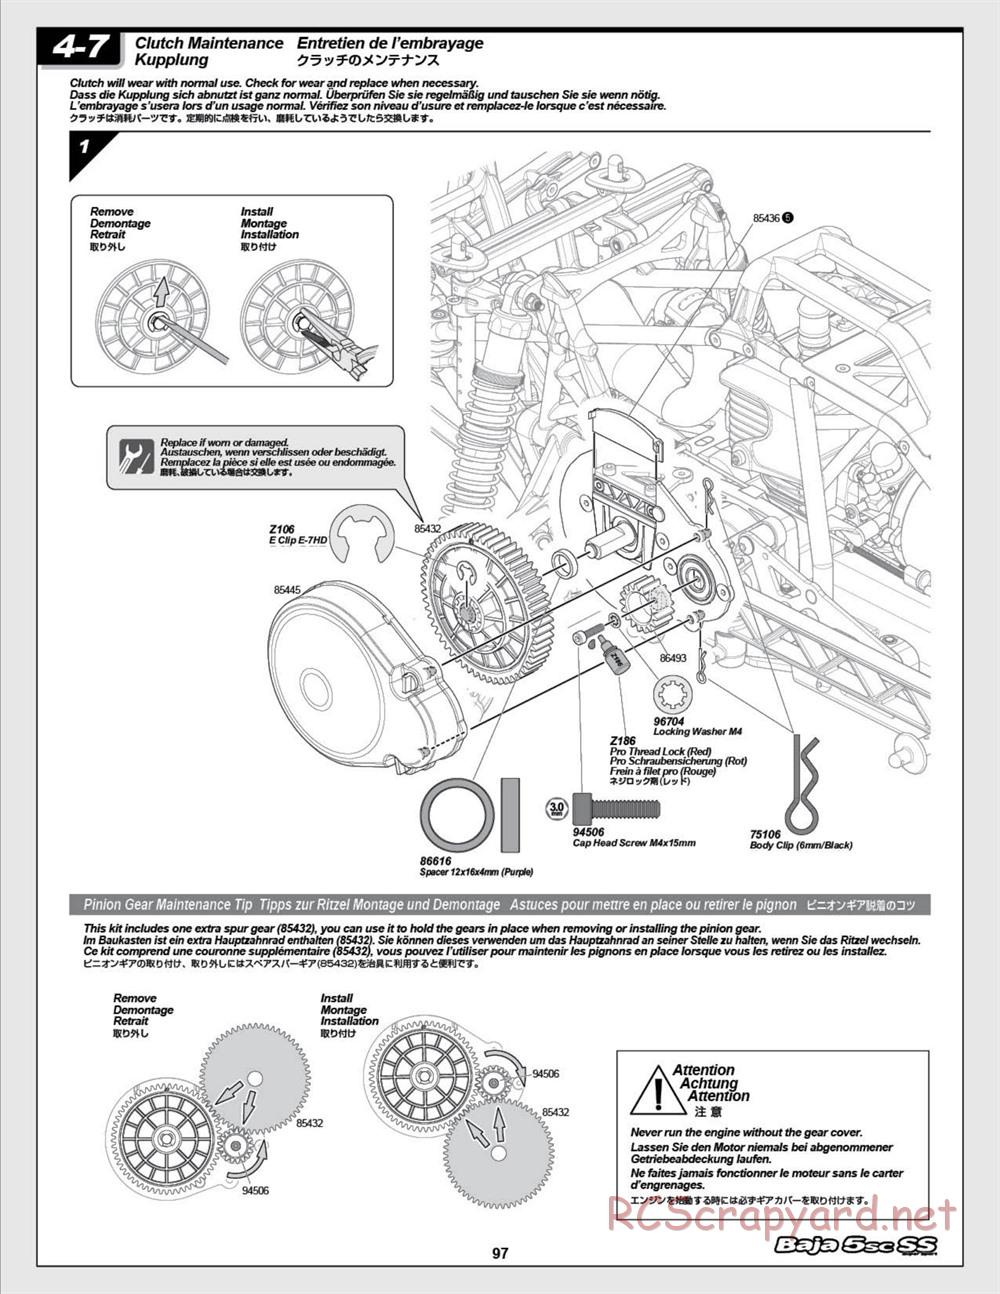 HPI - Baja 5SC SS - Exploded View - Page 97